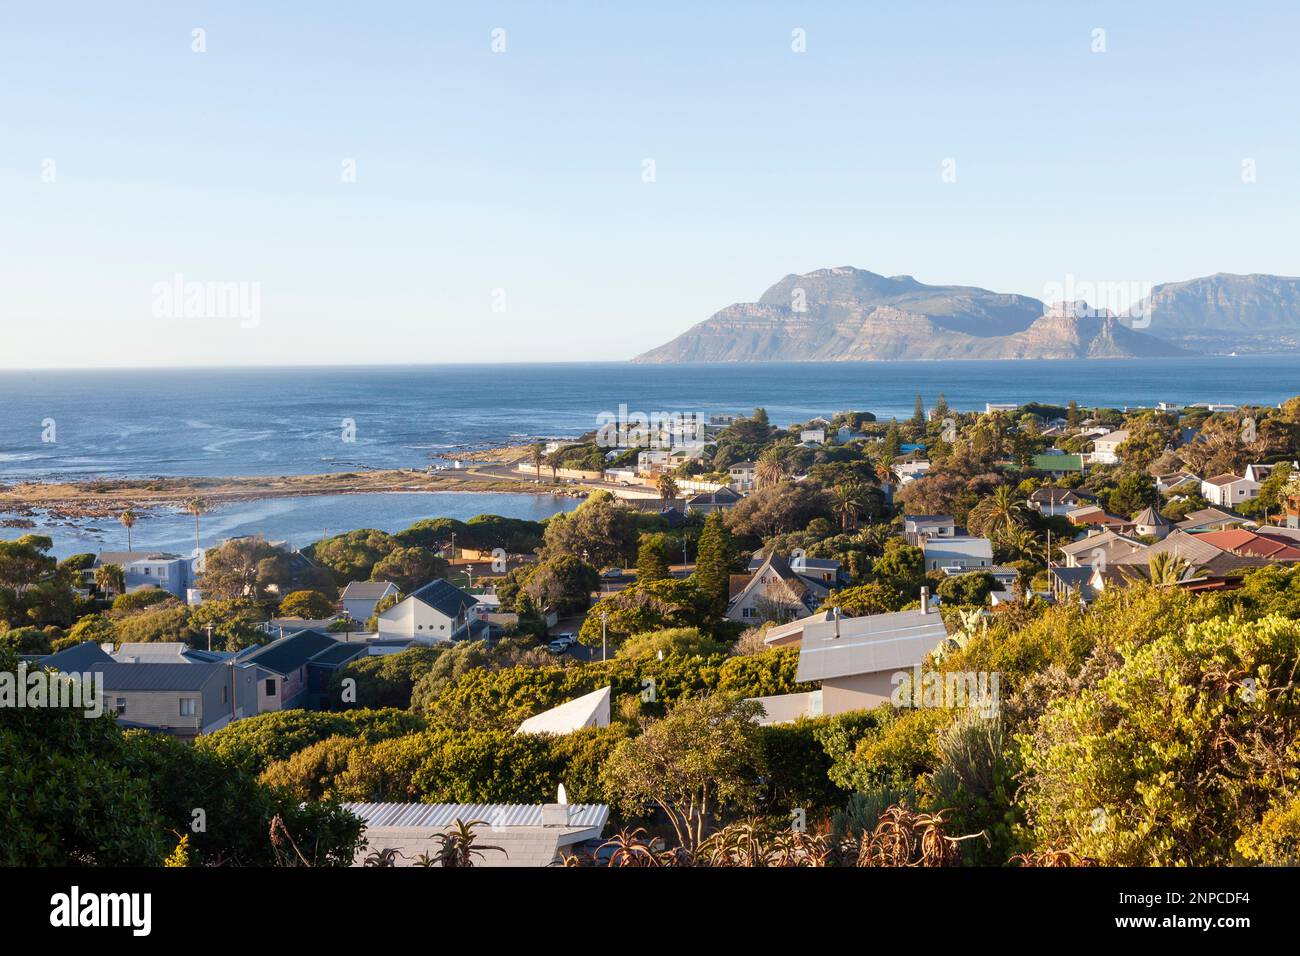 Aerial view of Kommetjie, Cape Town, Western Cape, South Africa and Die Kom, a natural tidal marine basin which is a birding hotspot Stock Photo